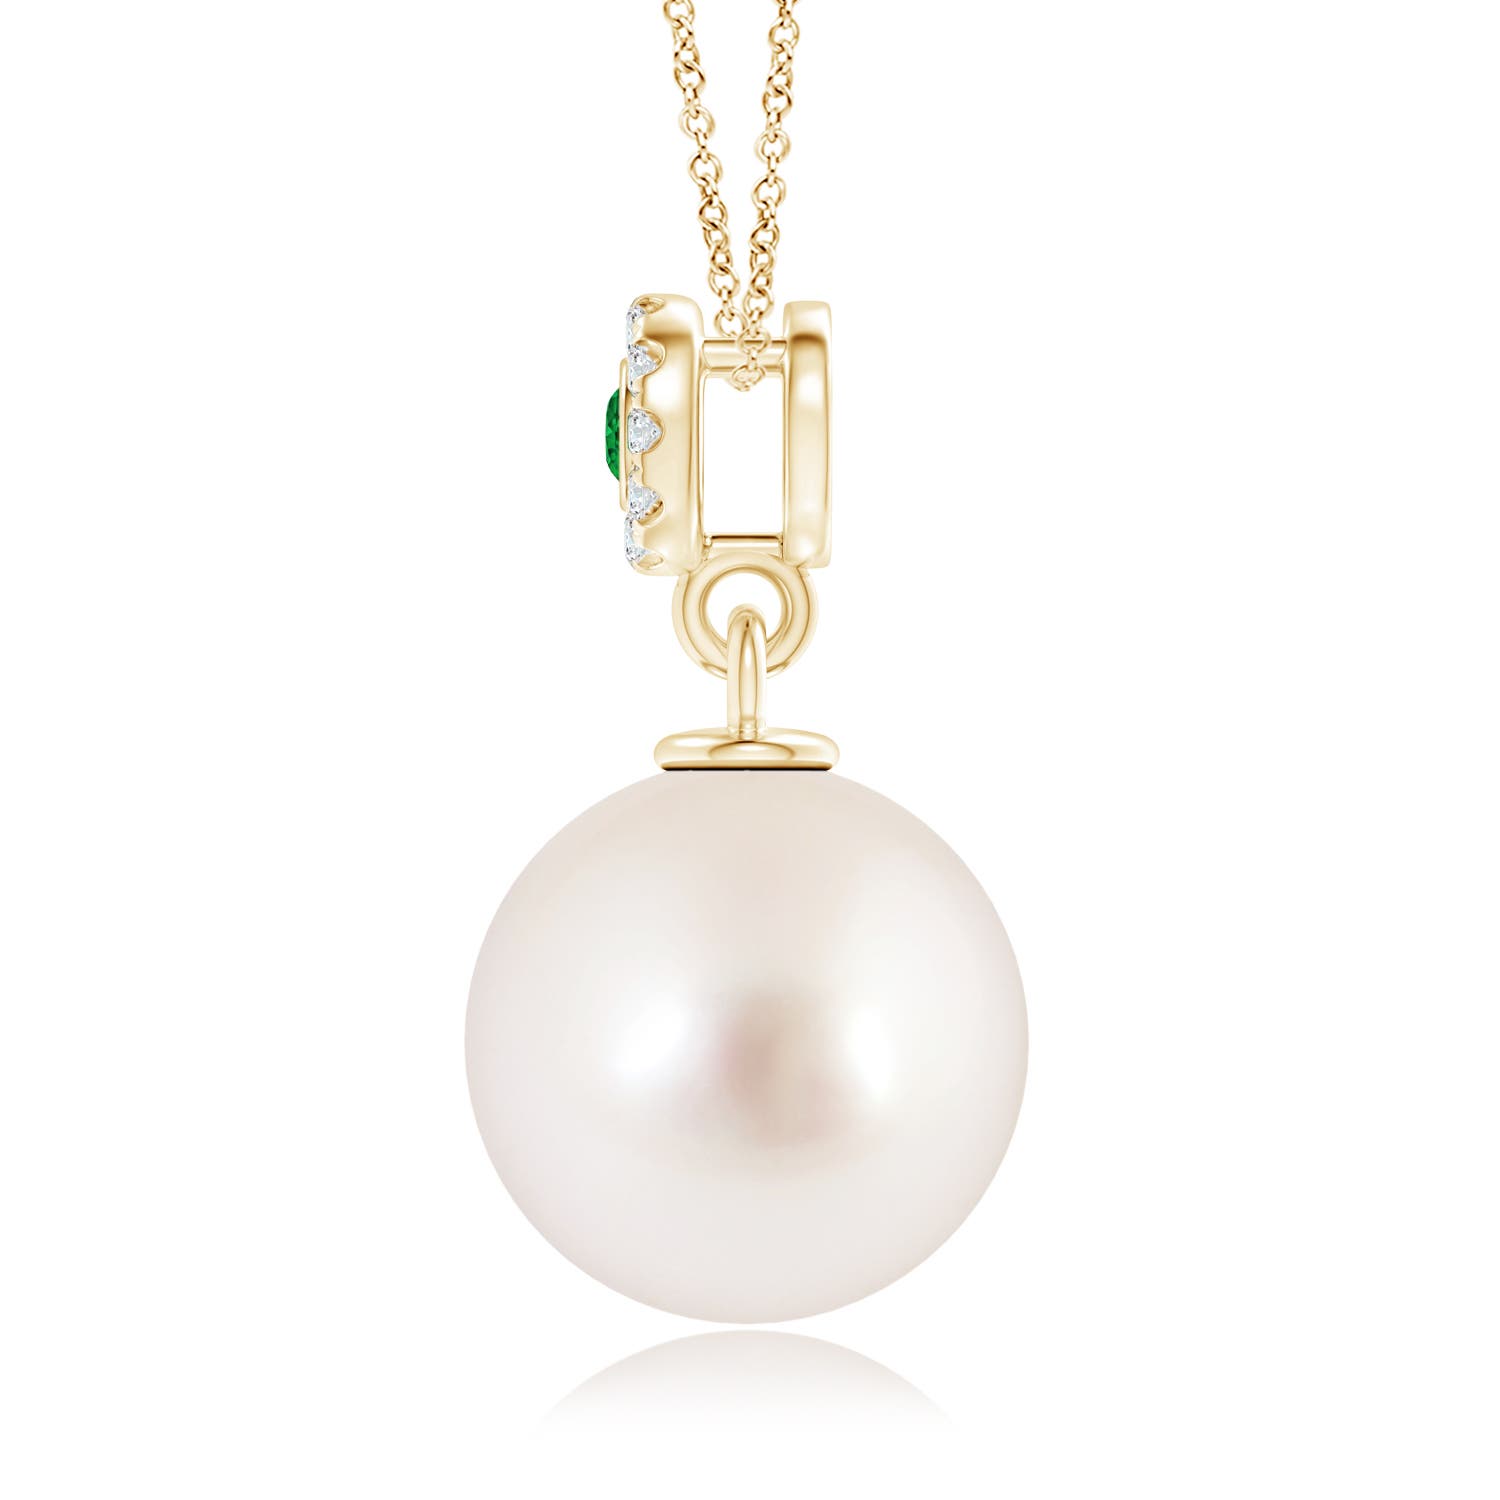 AAAA - South Sea Cultured Pearl / 7.3 CT / 14 KT Yellow Gold